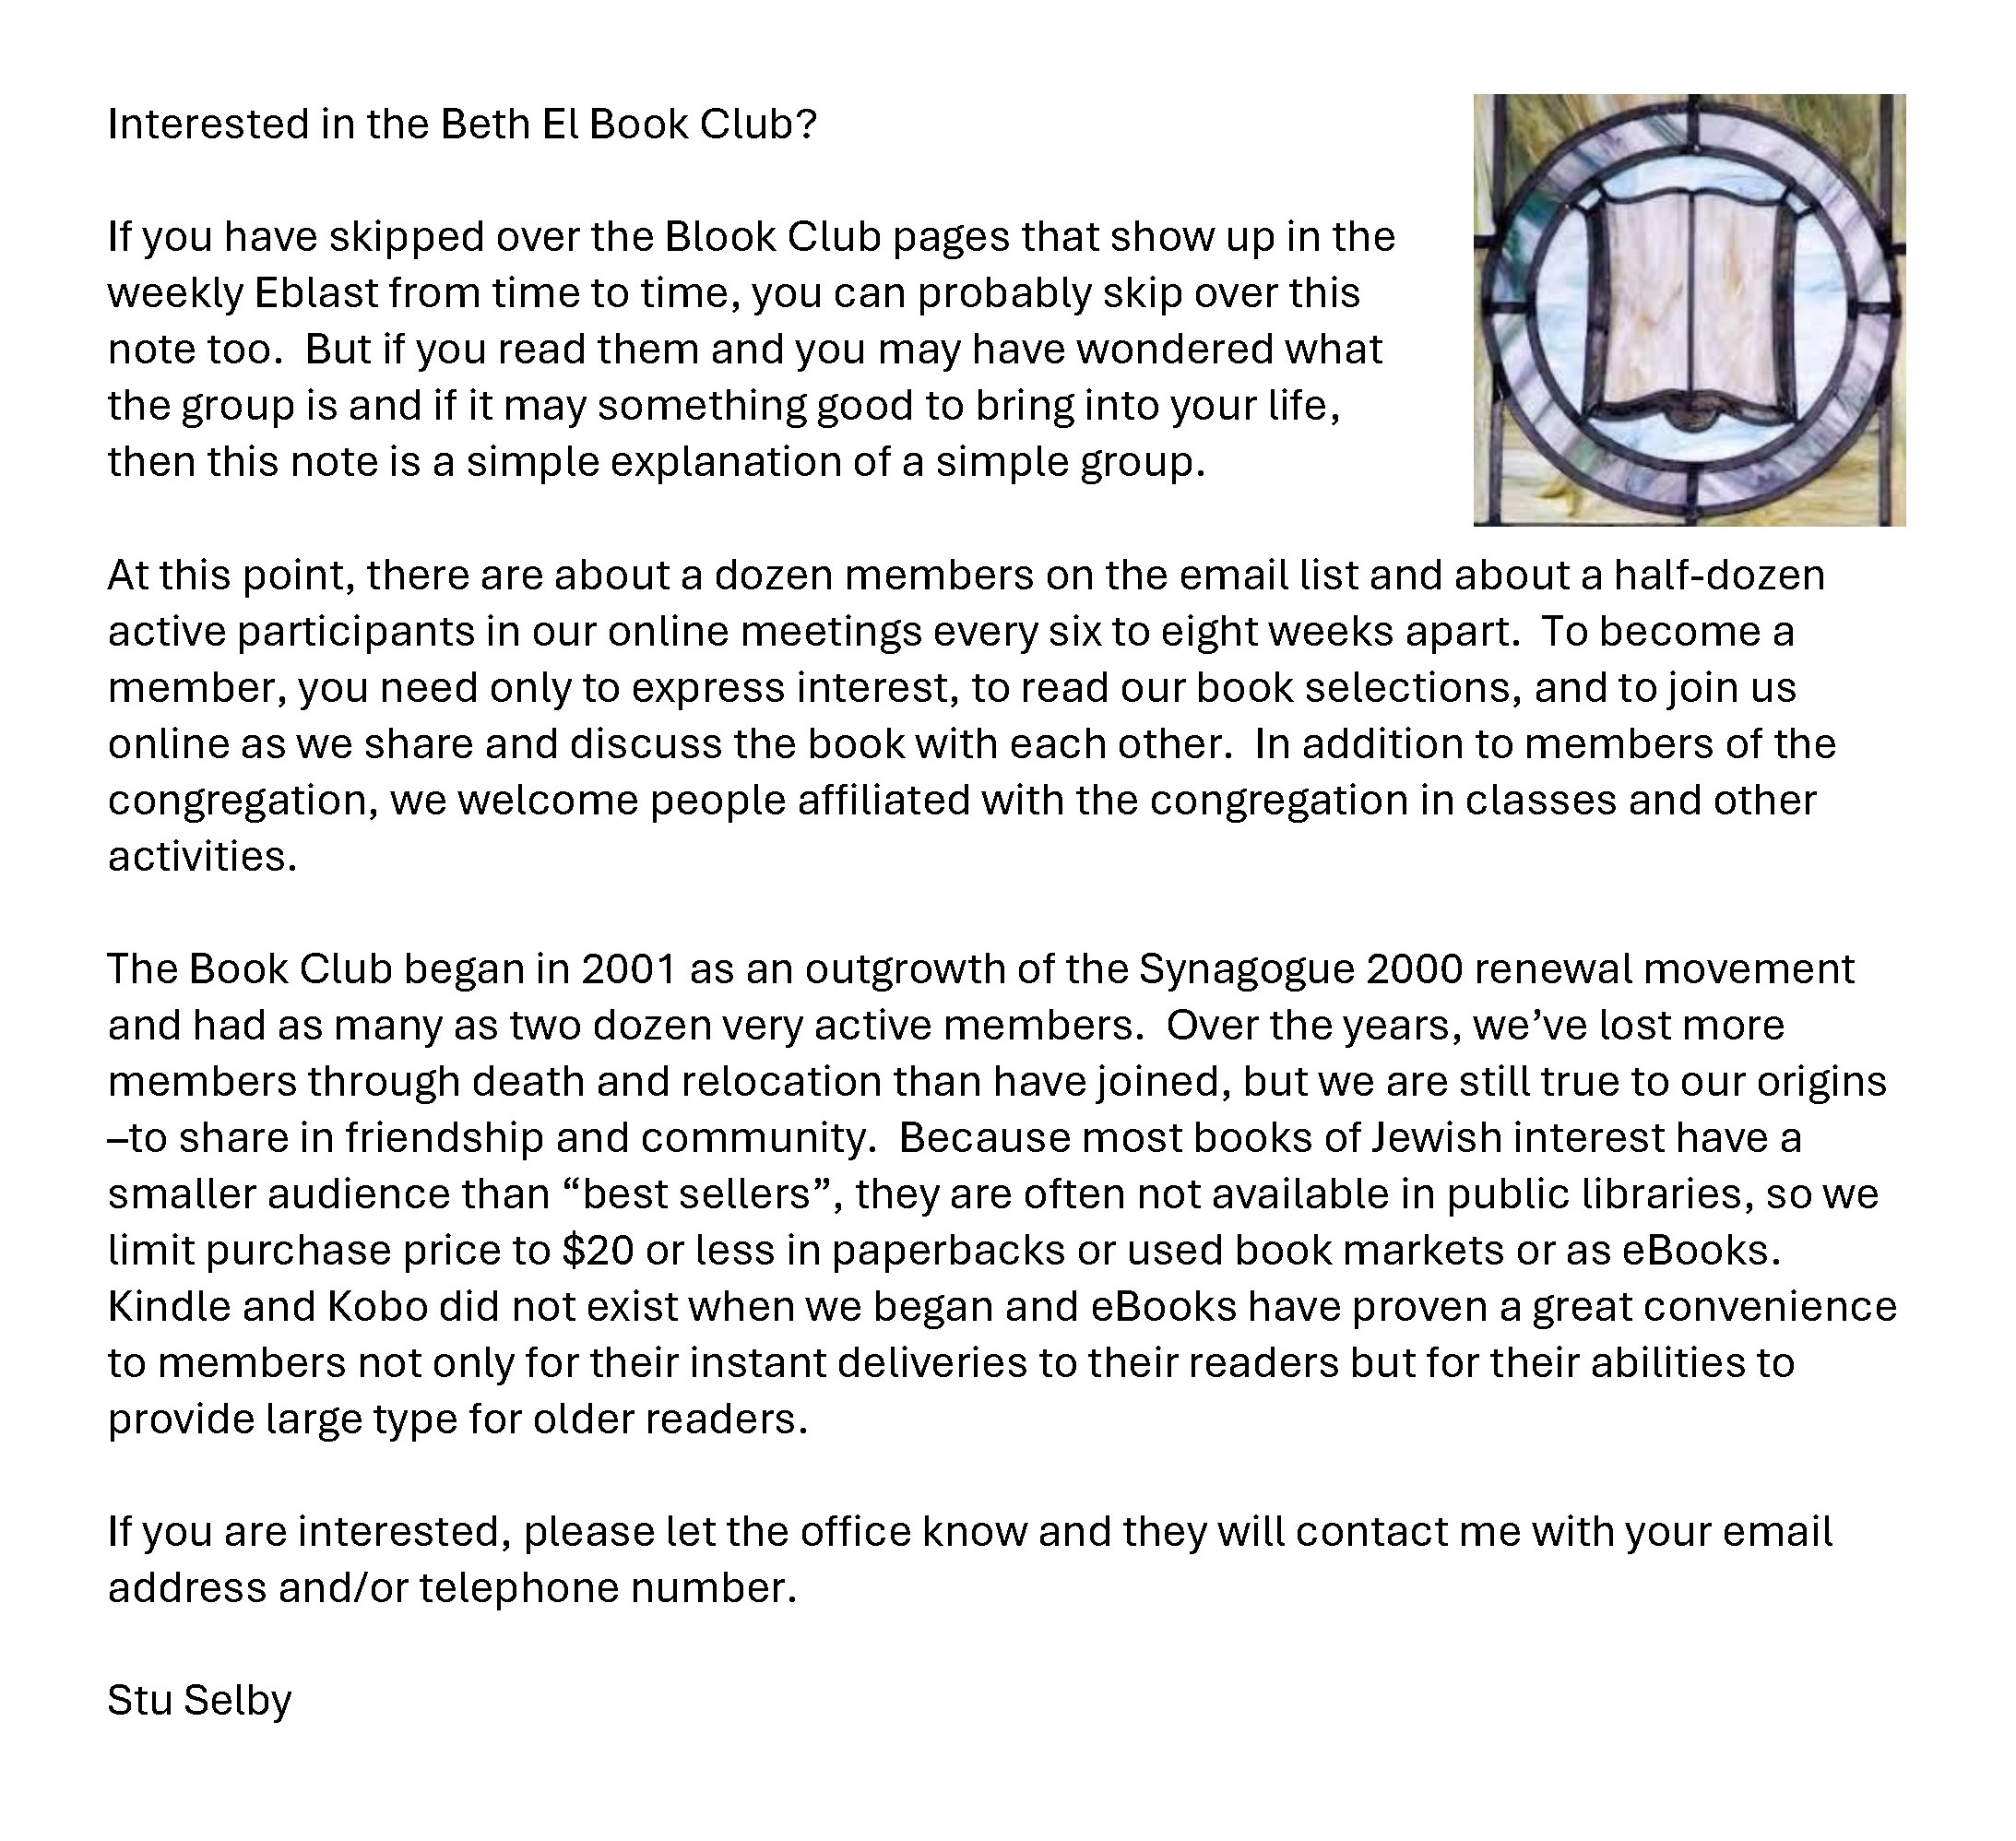 Interested in the Beth El Book Club